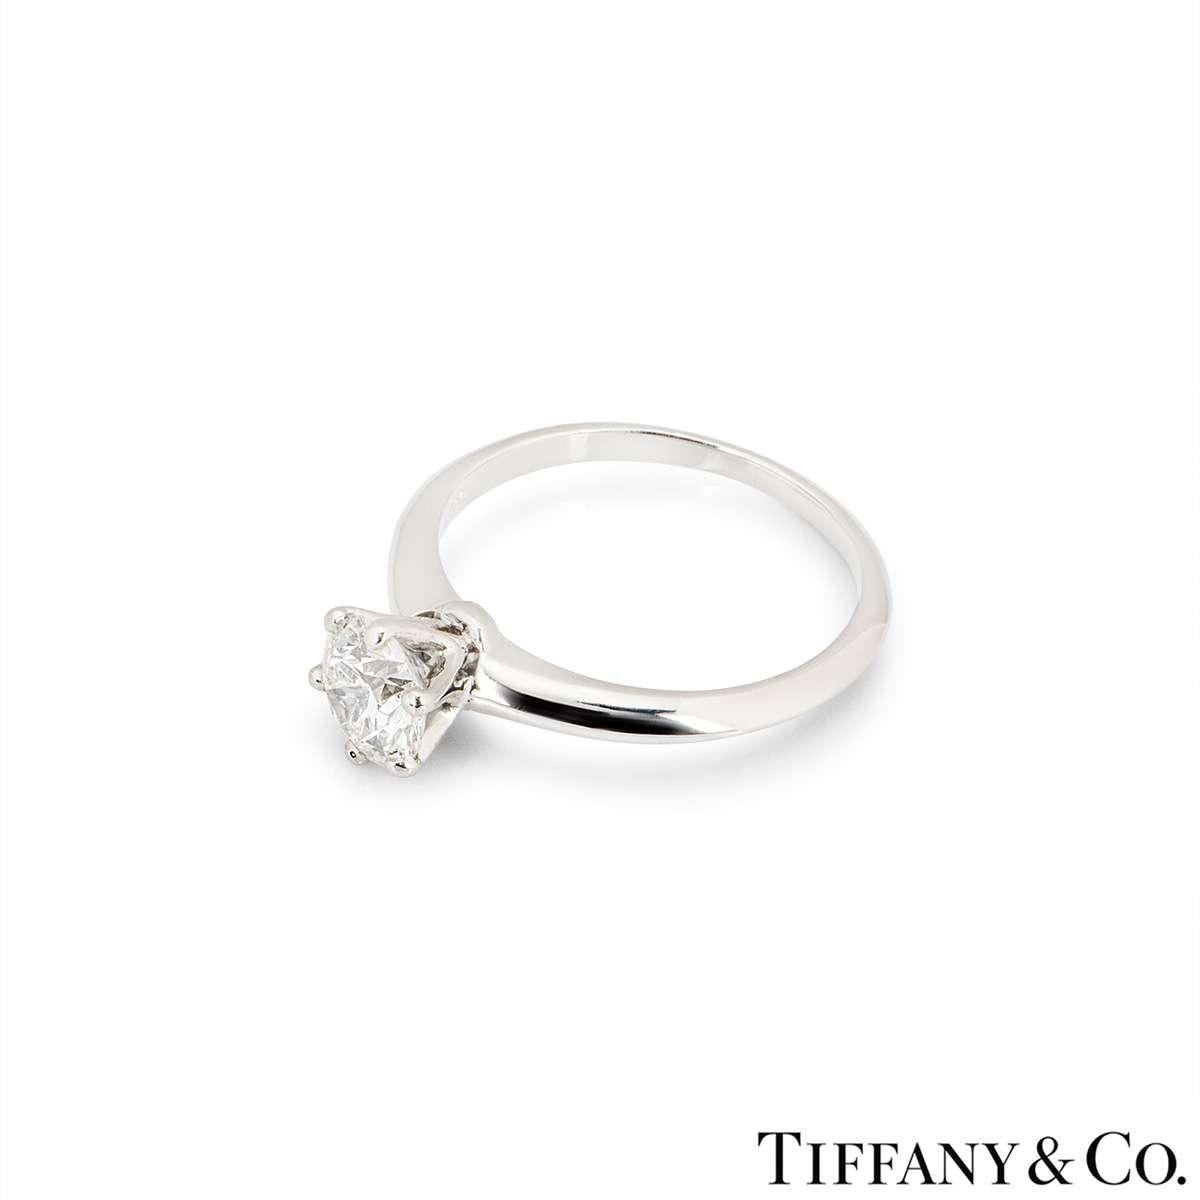 GIA Certified Tiffany & Co. Platinum Diamond Setting Ring 1.05ct G/VS1 In Excellent Condition For Sale In London, GB